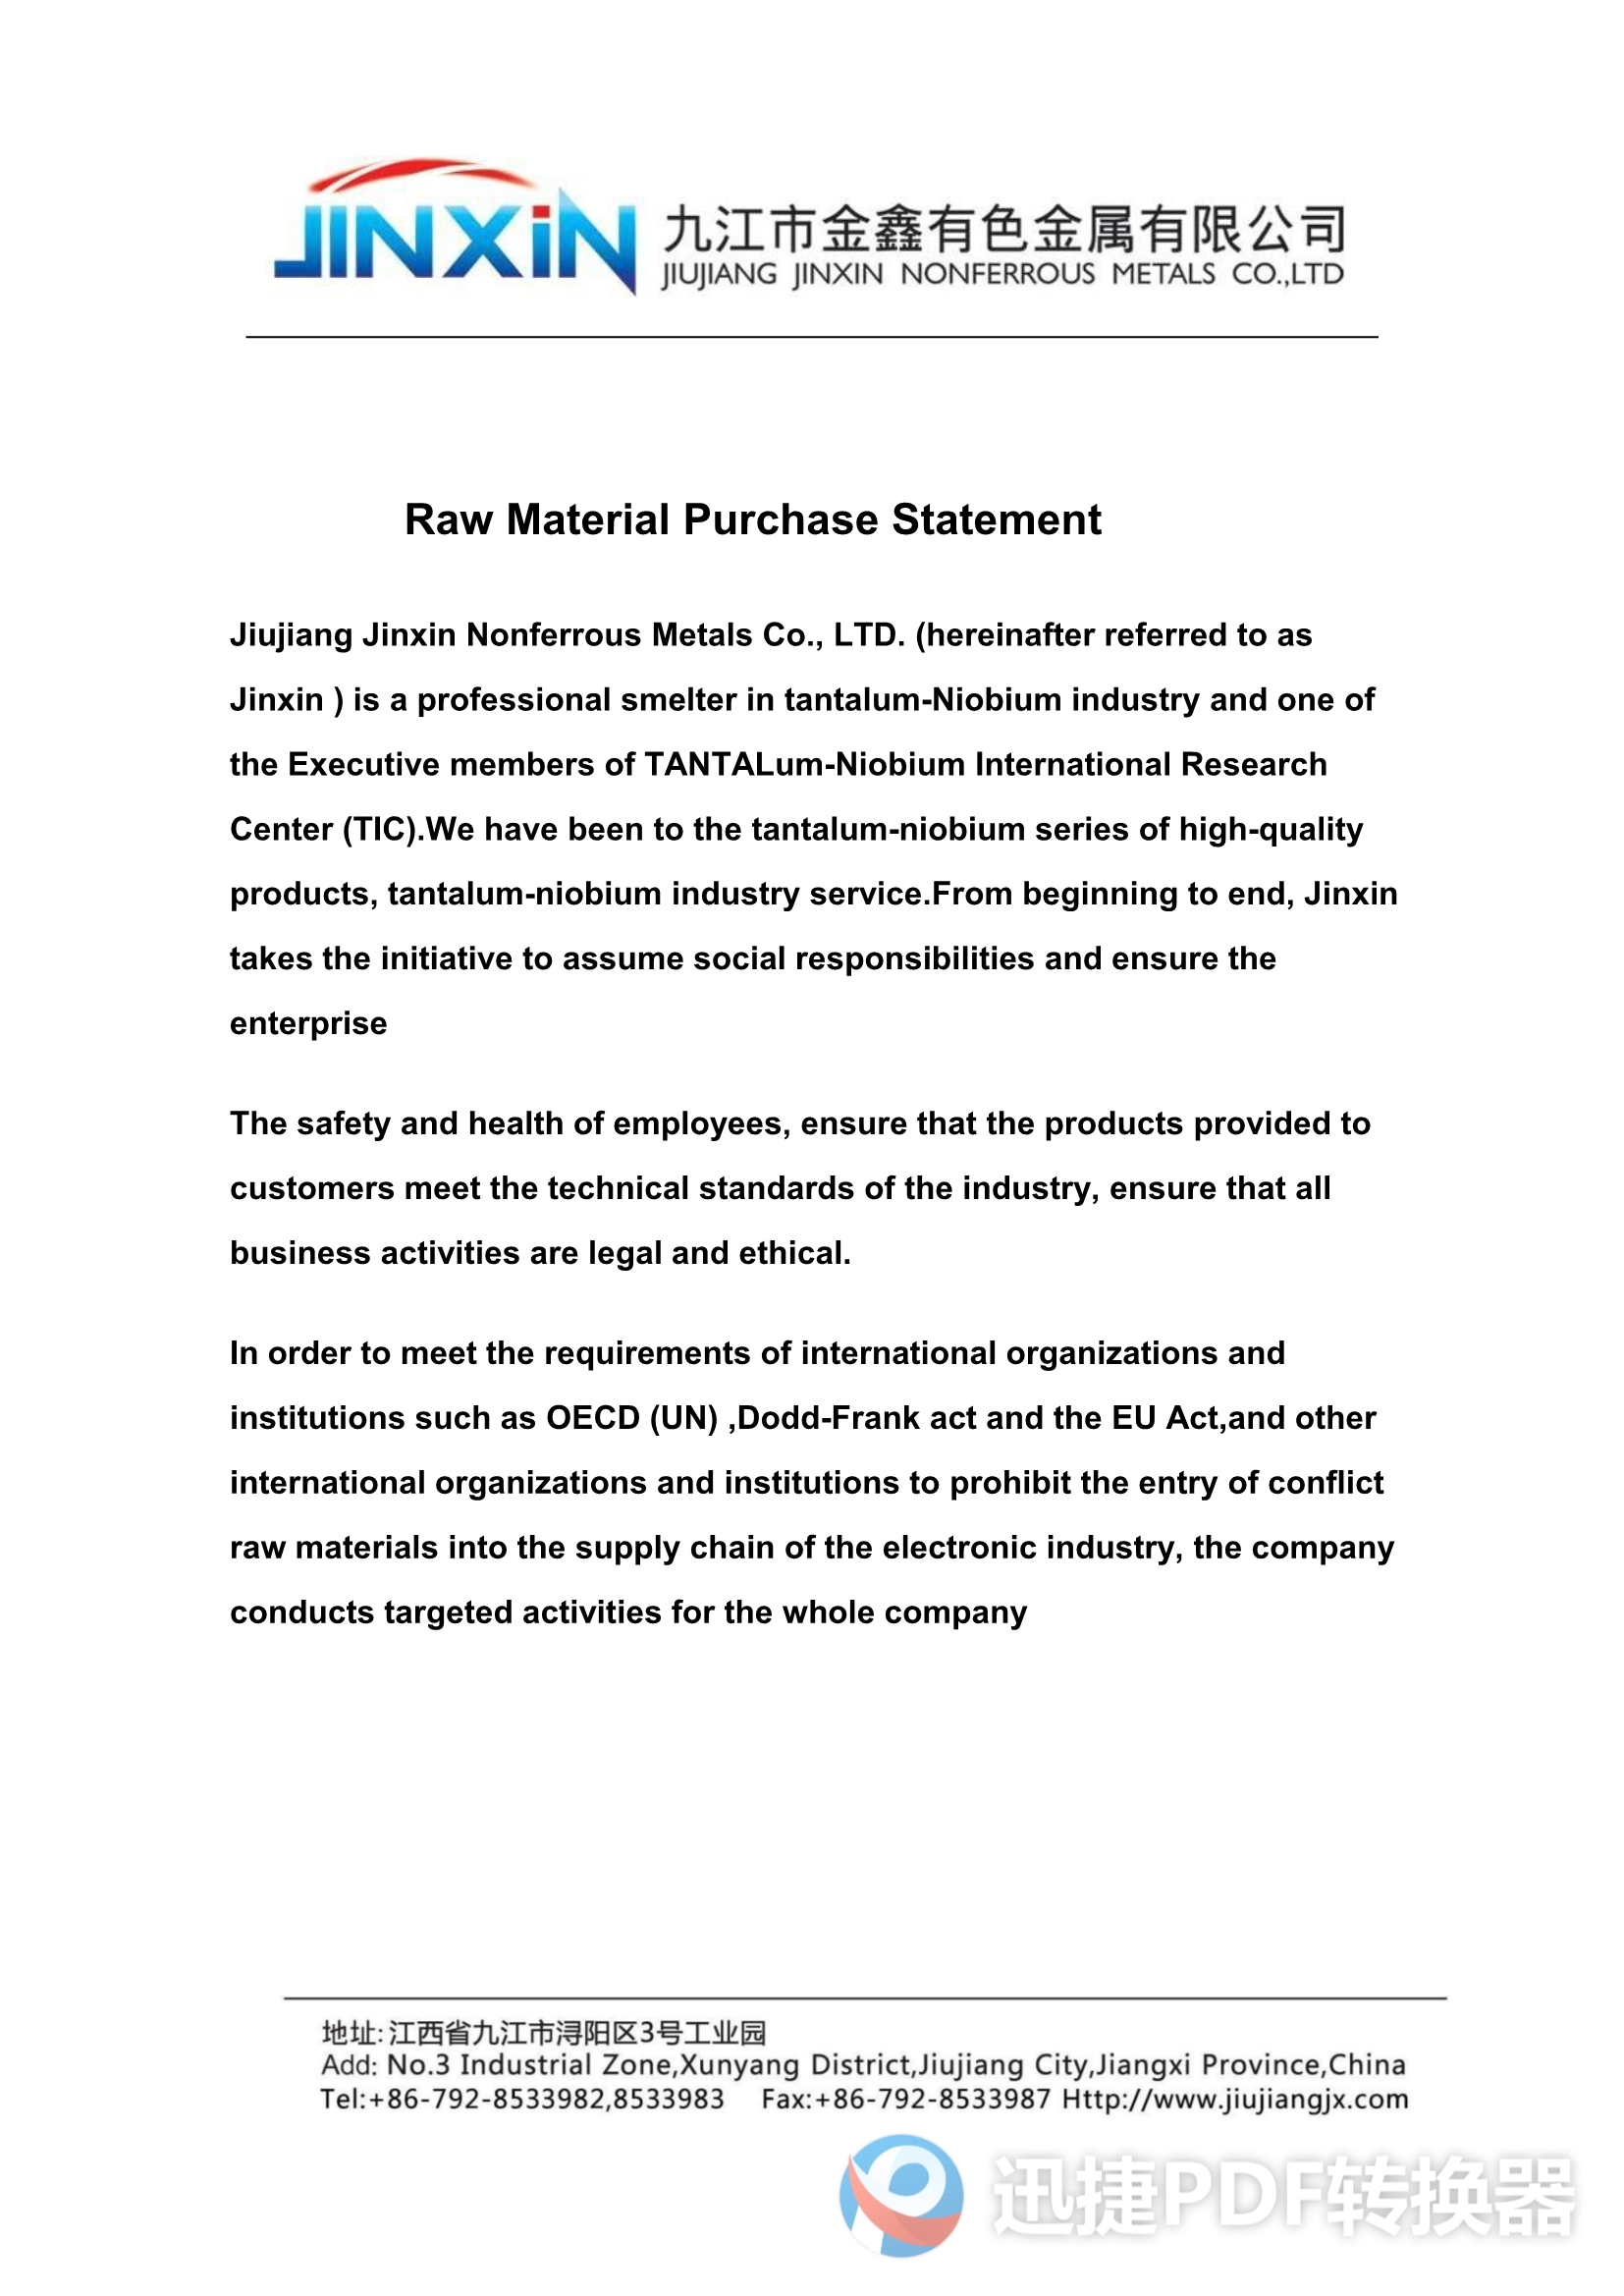 Raw Material Purchase Statement 2021